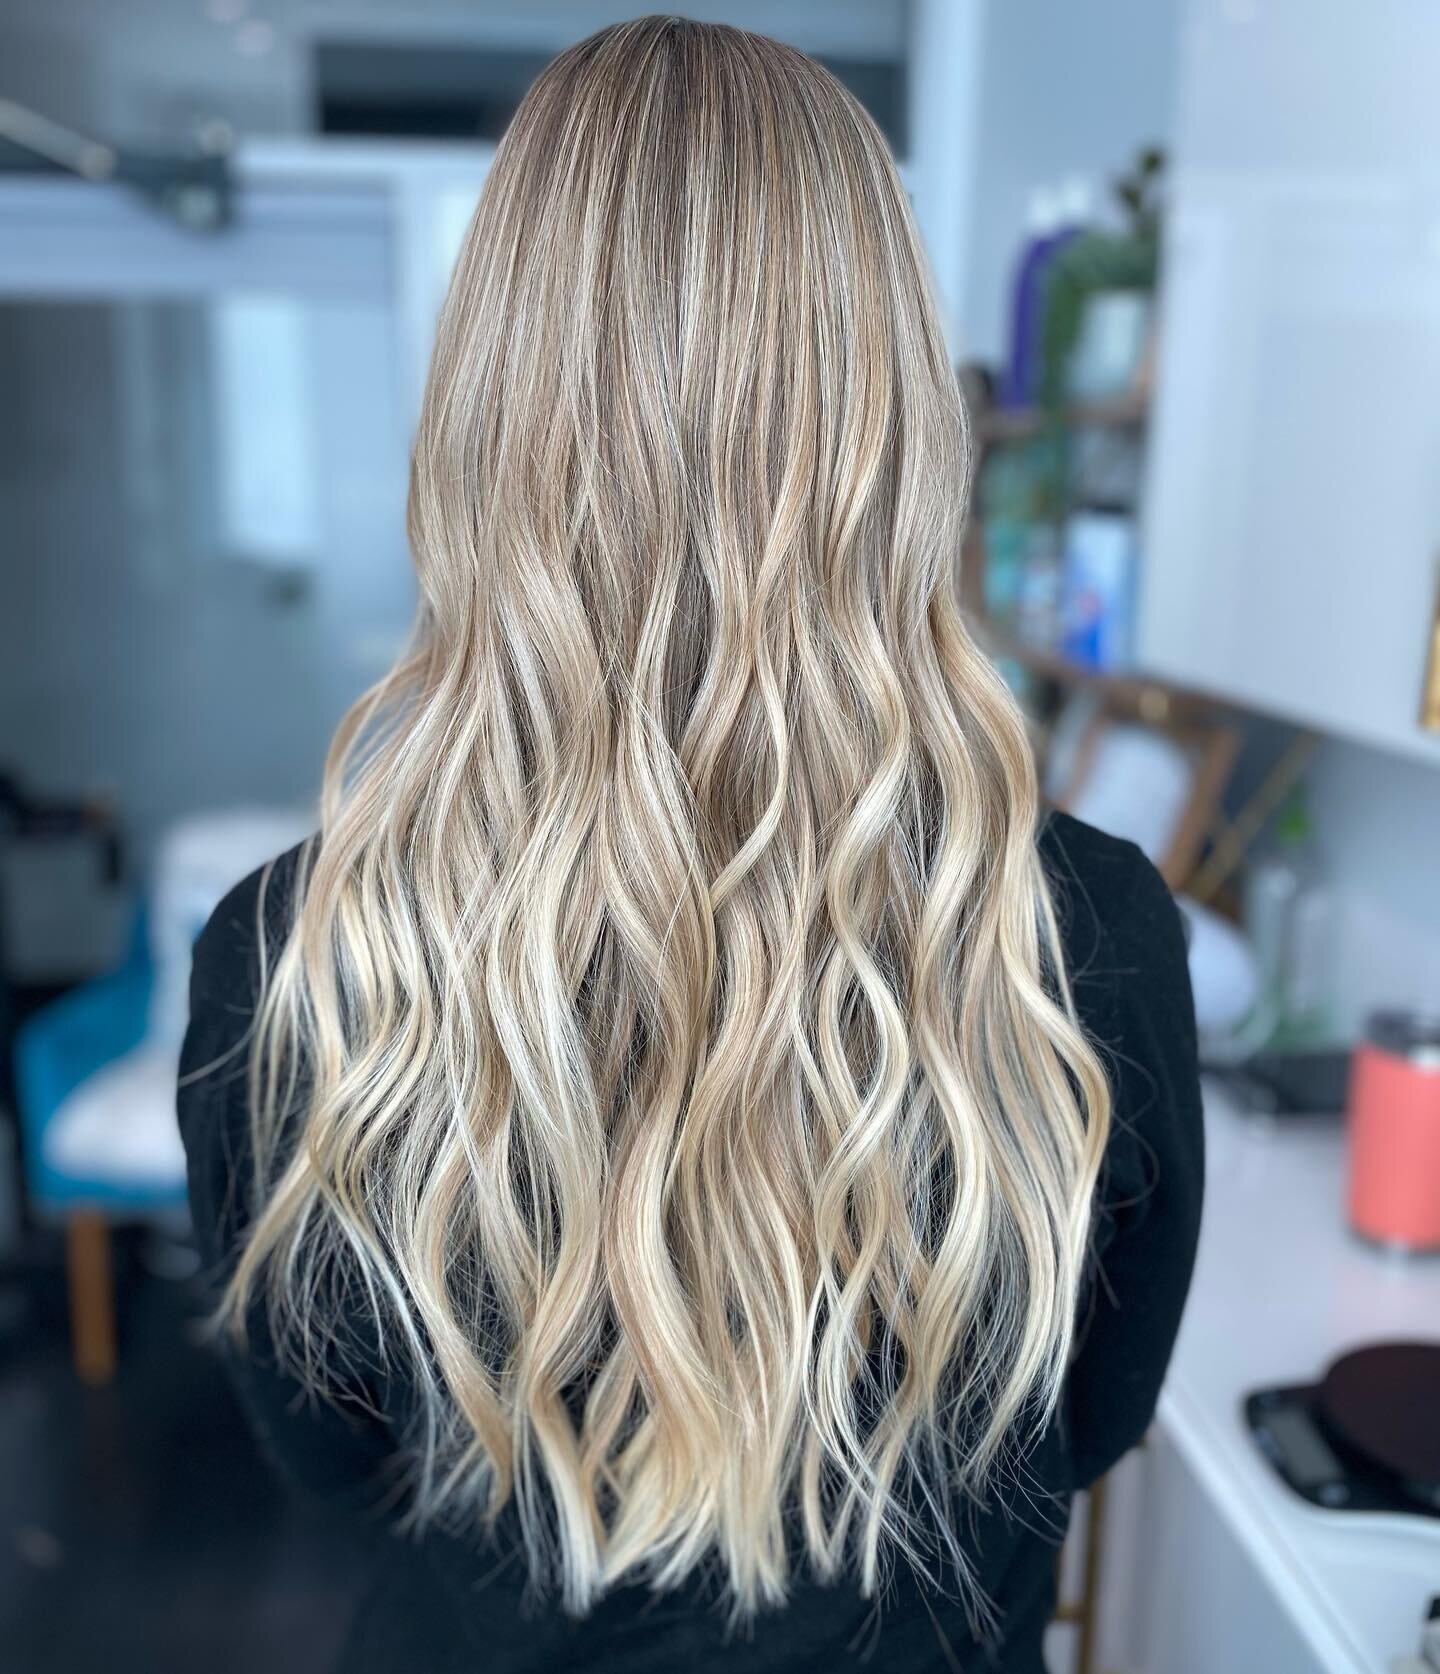 Finish 2020 with amazing hair bc you deserve to smile about something this year! Limited December spaces available, book now!! &bull;
&bull;
&bull;
&bull;
&bull;
&bull;
&bull;
&bull;
#hairbymackenziejacobs #hermosabeach #sunkissedhairstudio #hermosab